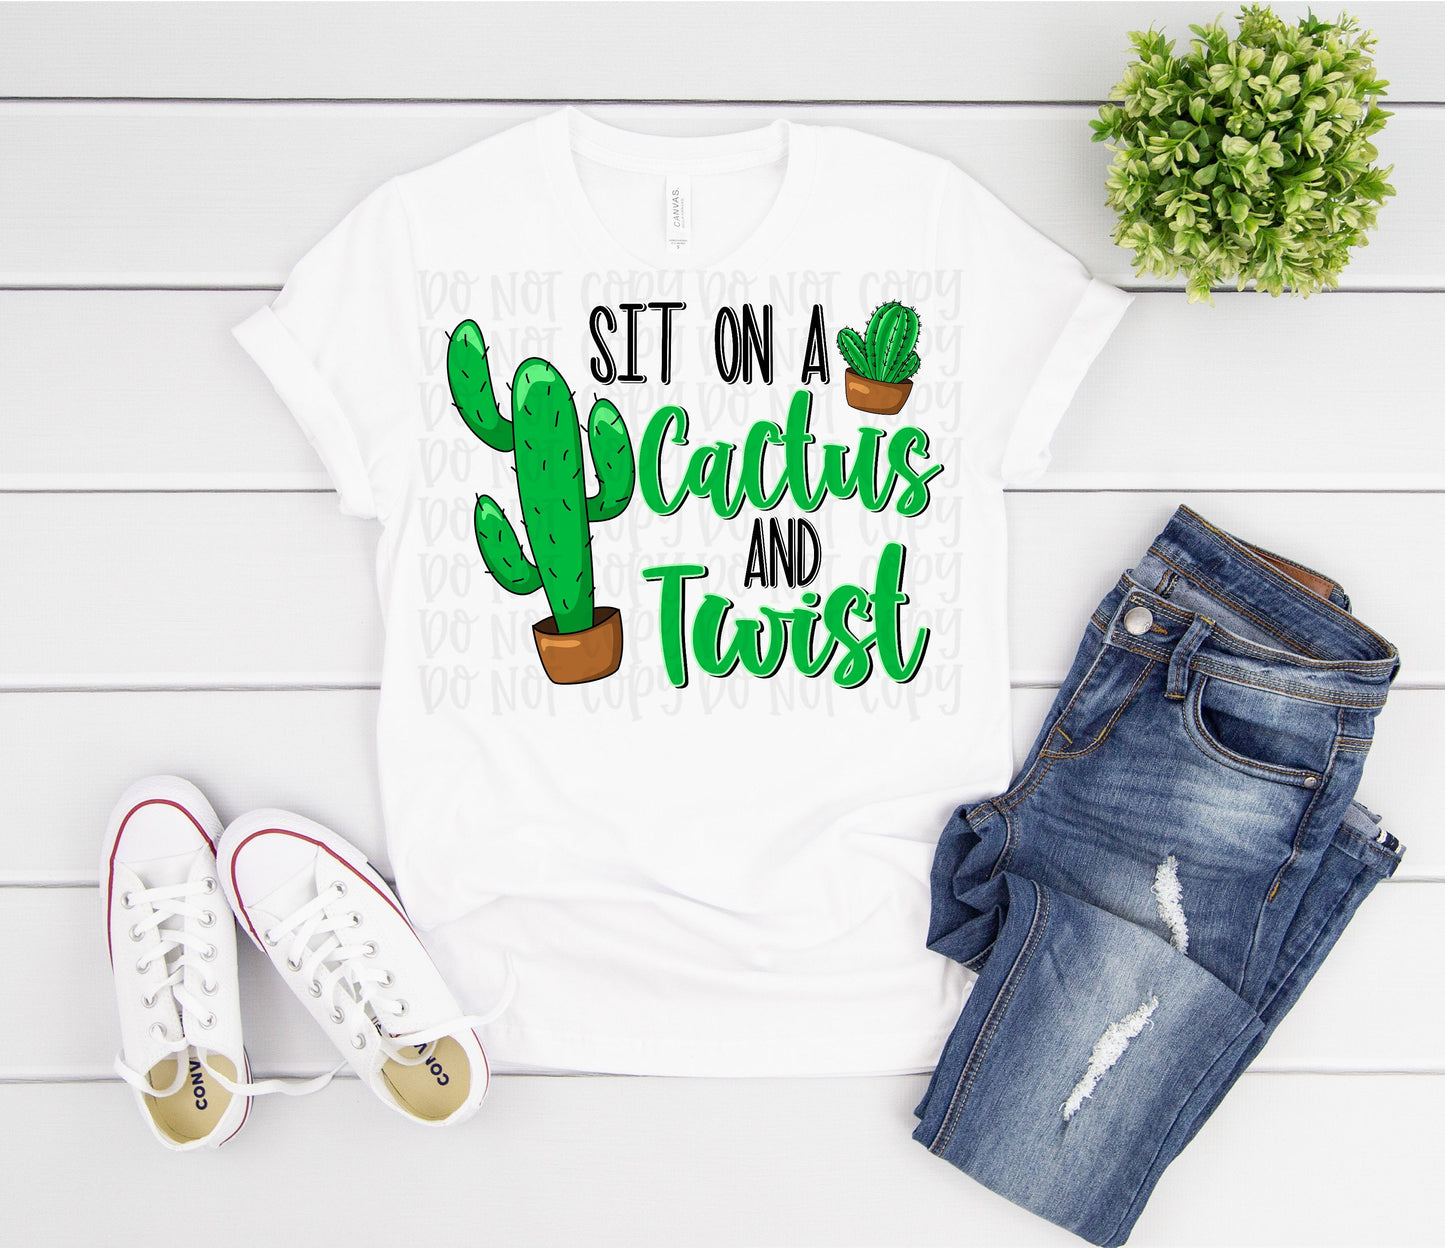 Sit on a cactus -2